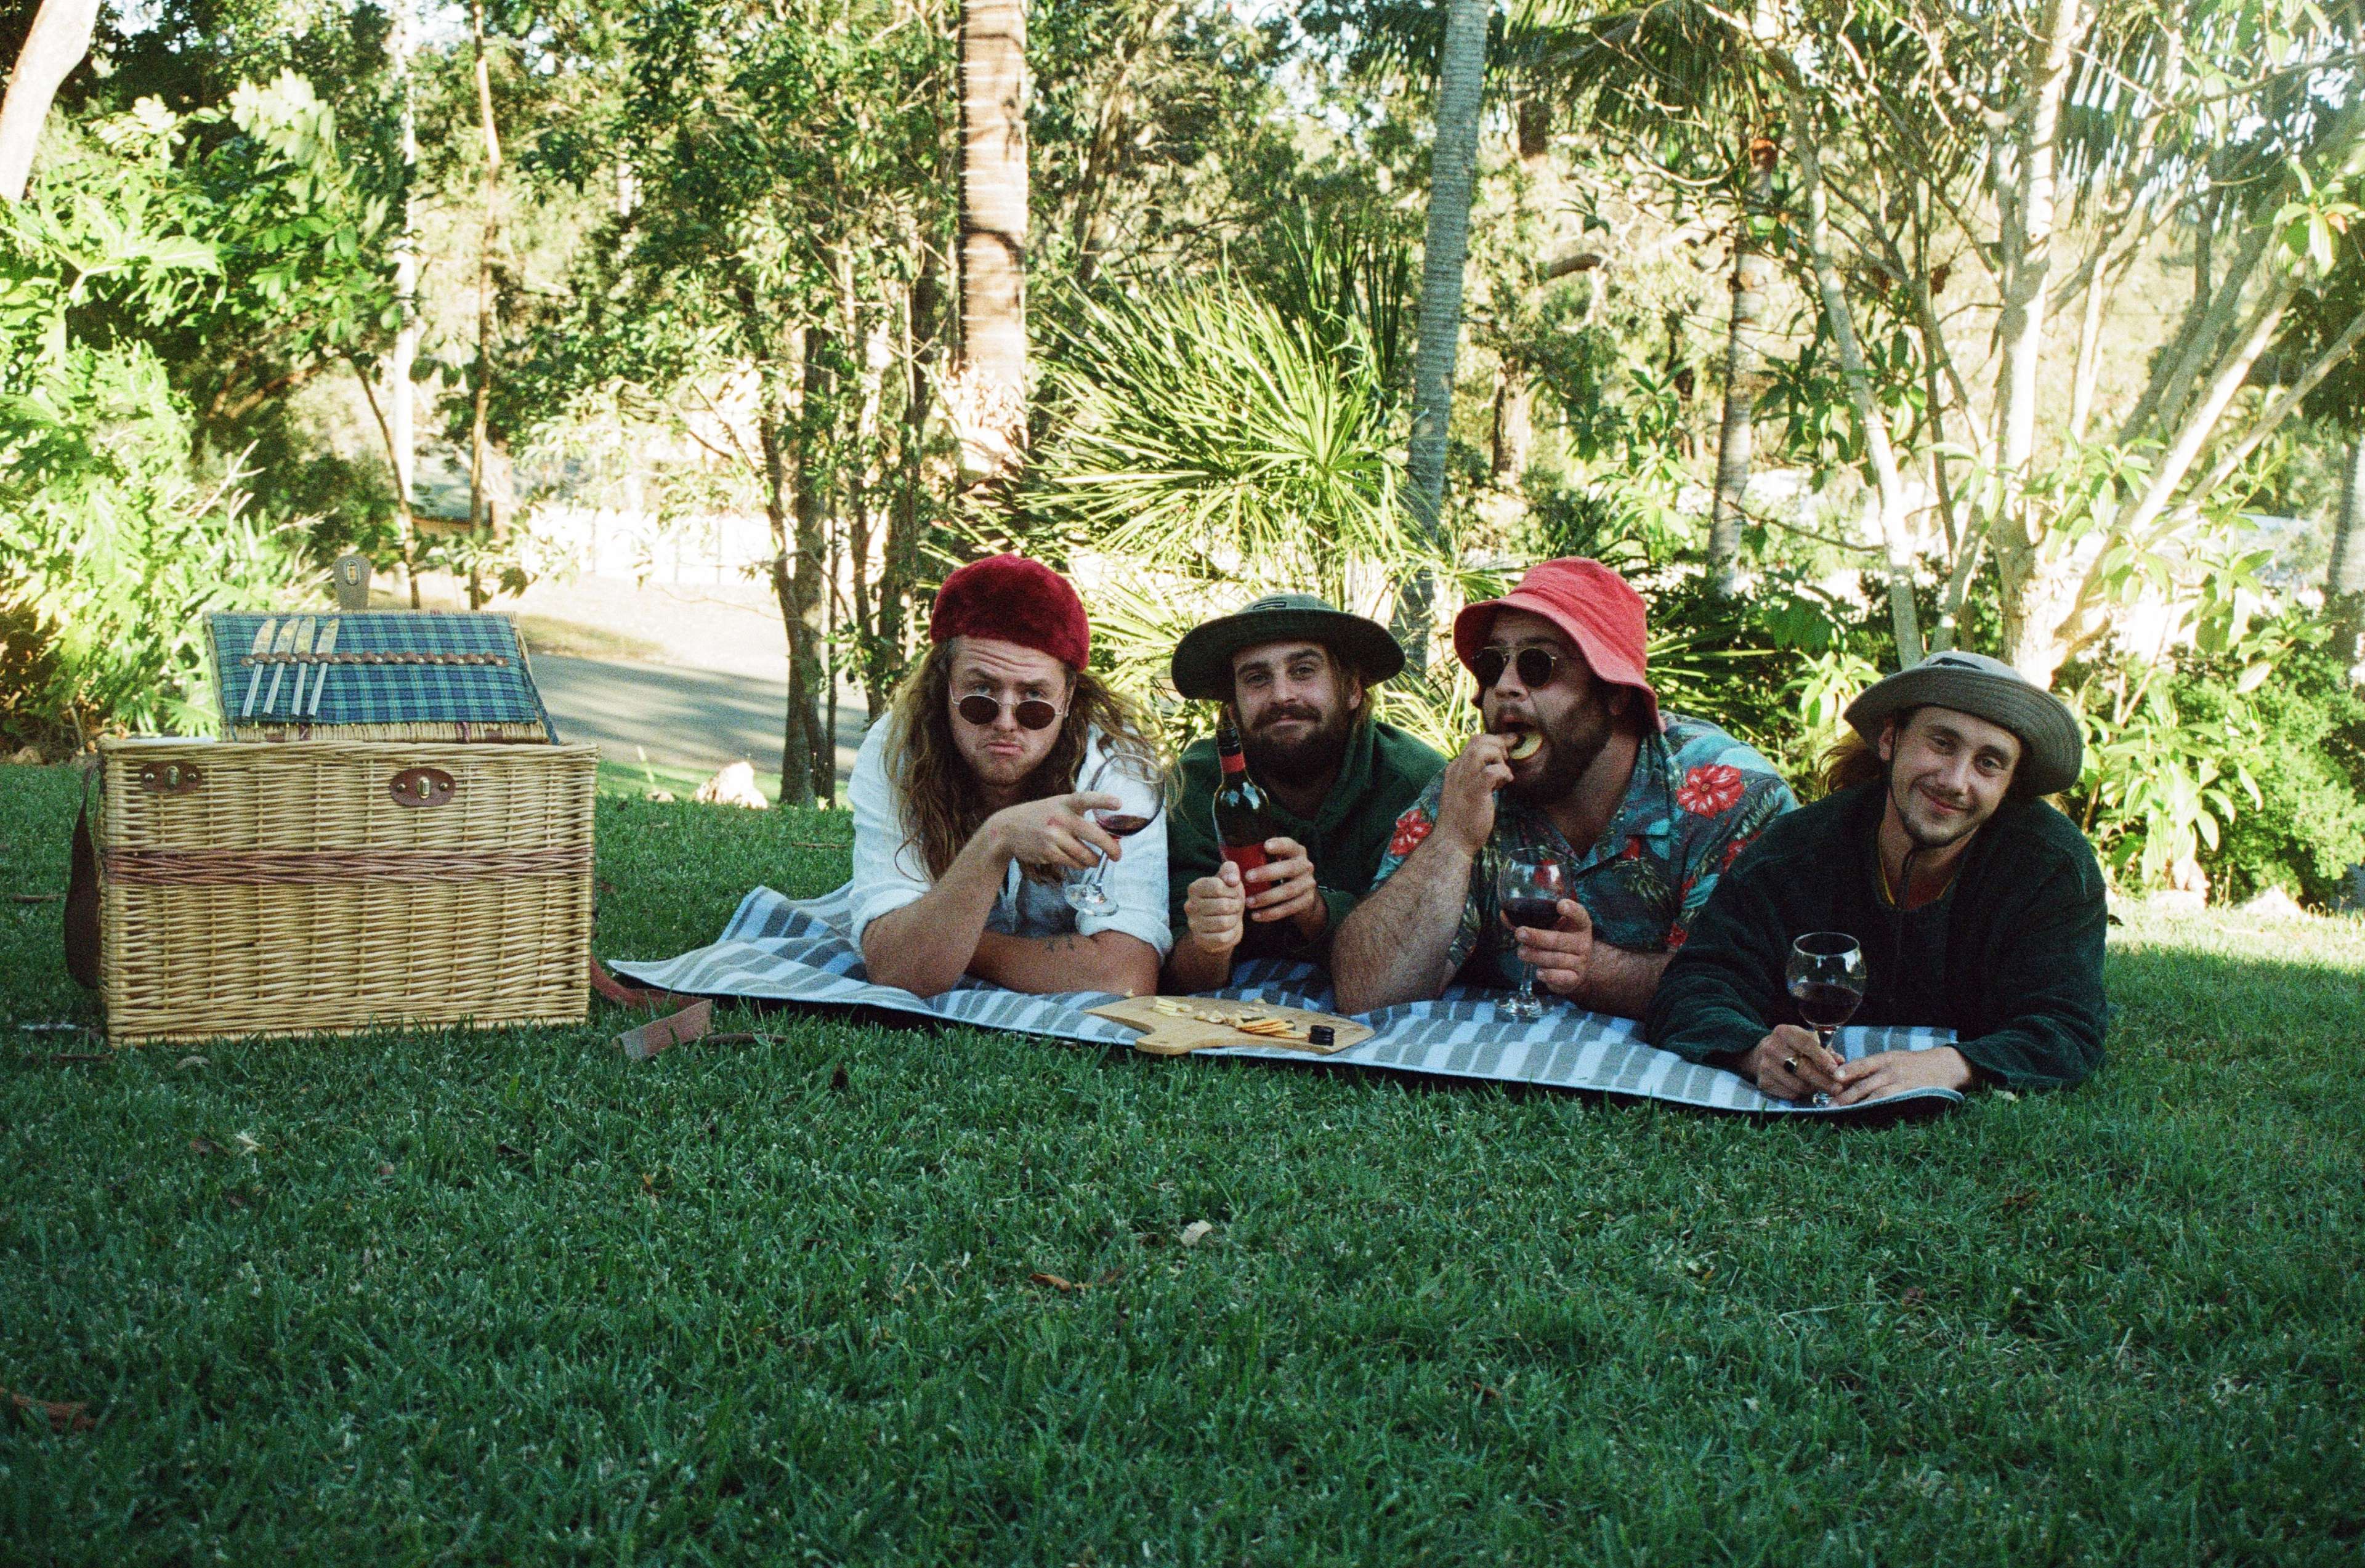 Beddy Rays Added to Triple J + Unearthed's Feature Artist